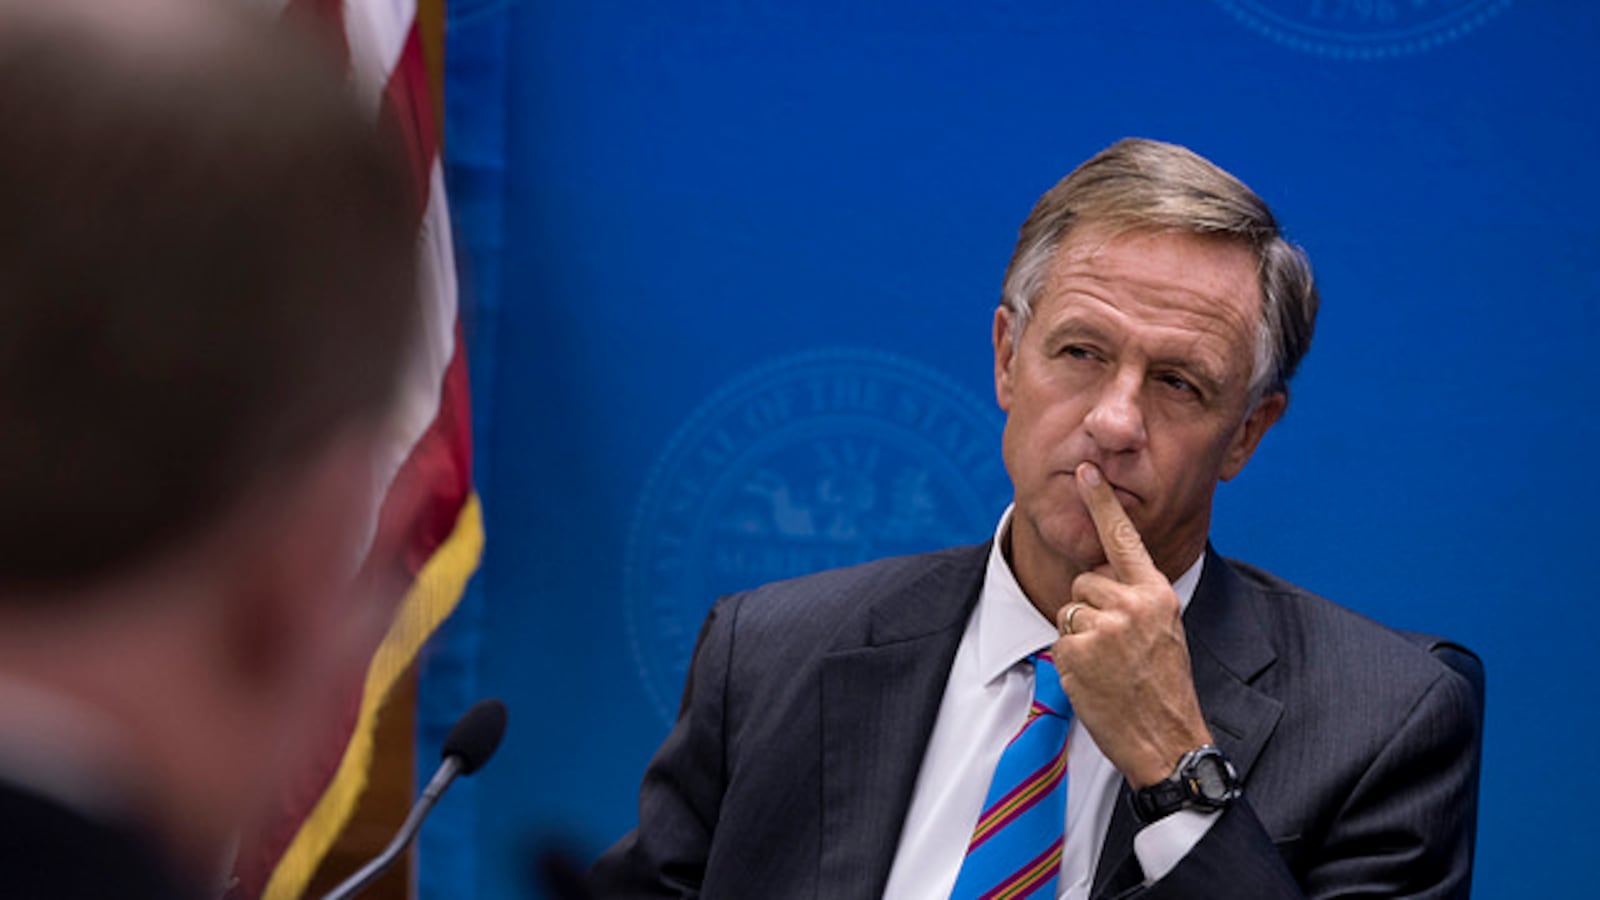 Gov. Bill Haslam has named a working group to review school safety in Tennessee. He urged them to "move quickly" as the state seeks to avoid a school shooting like last month's in Parkland, Florida, that killed 17 people.